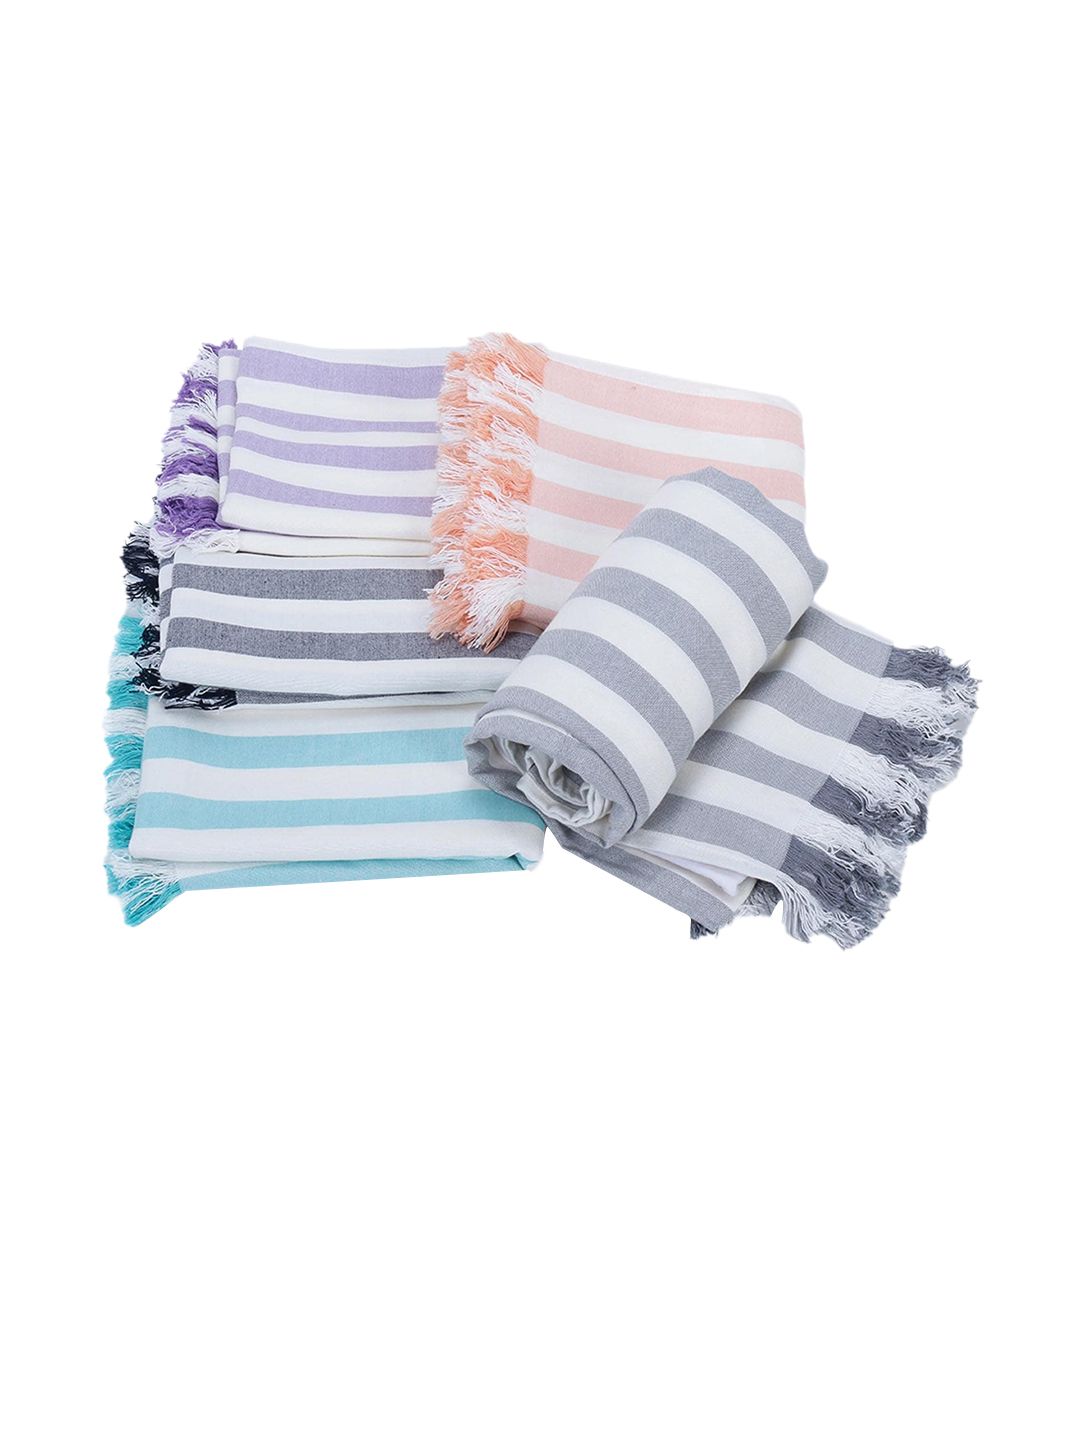 haus & kinder Blue Striped 250 GSM Bath Bamboo Bath Towels Price in India